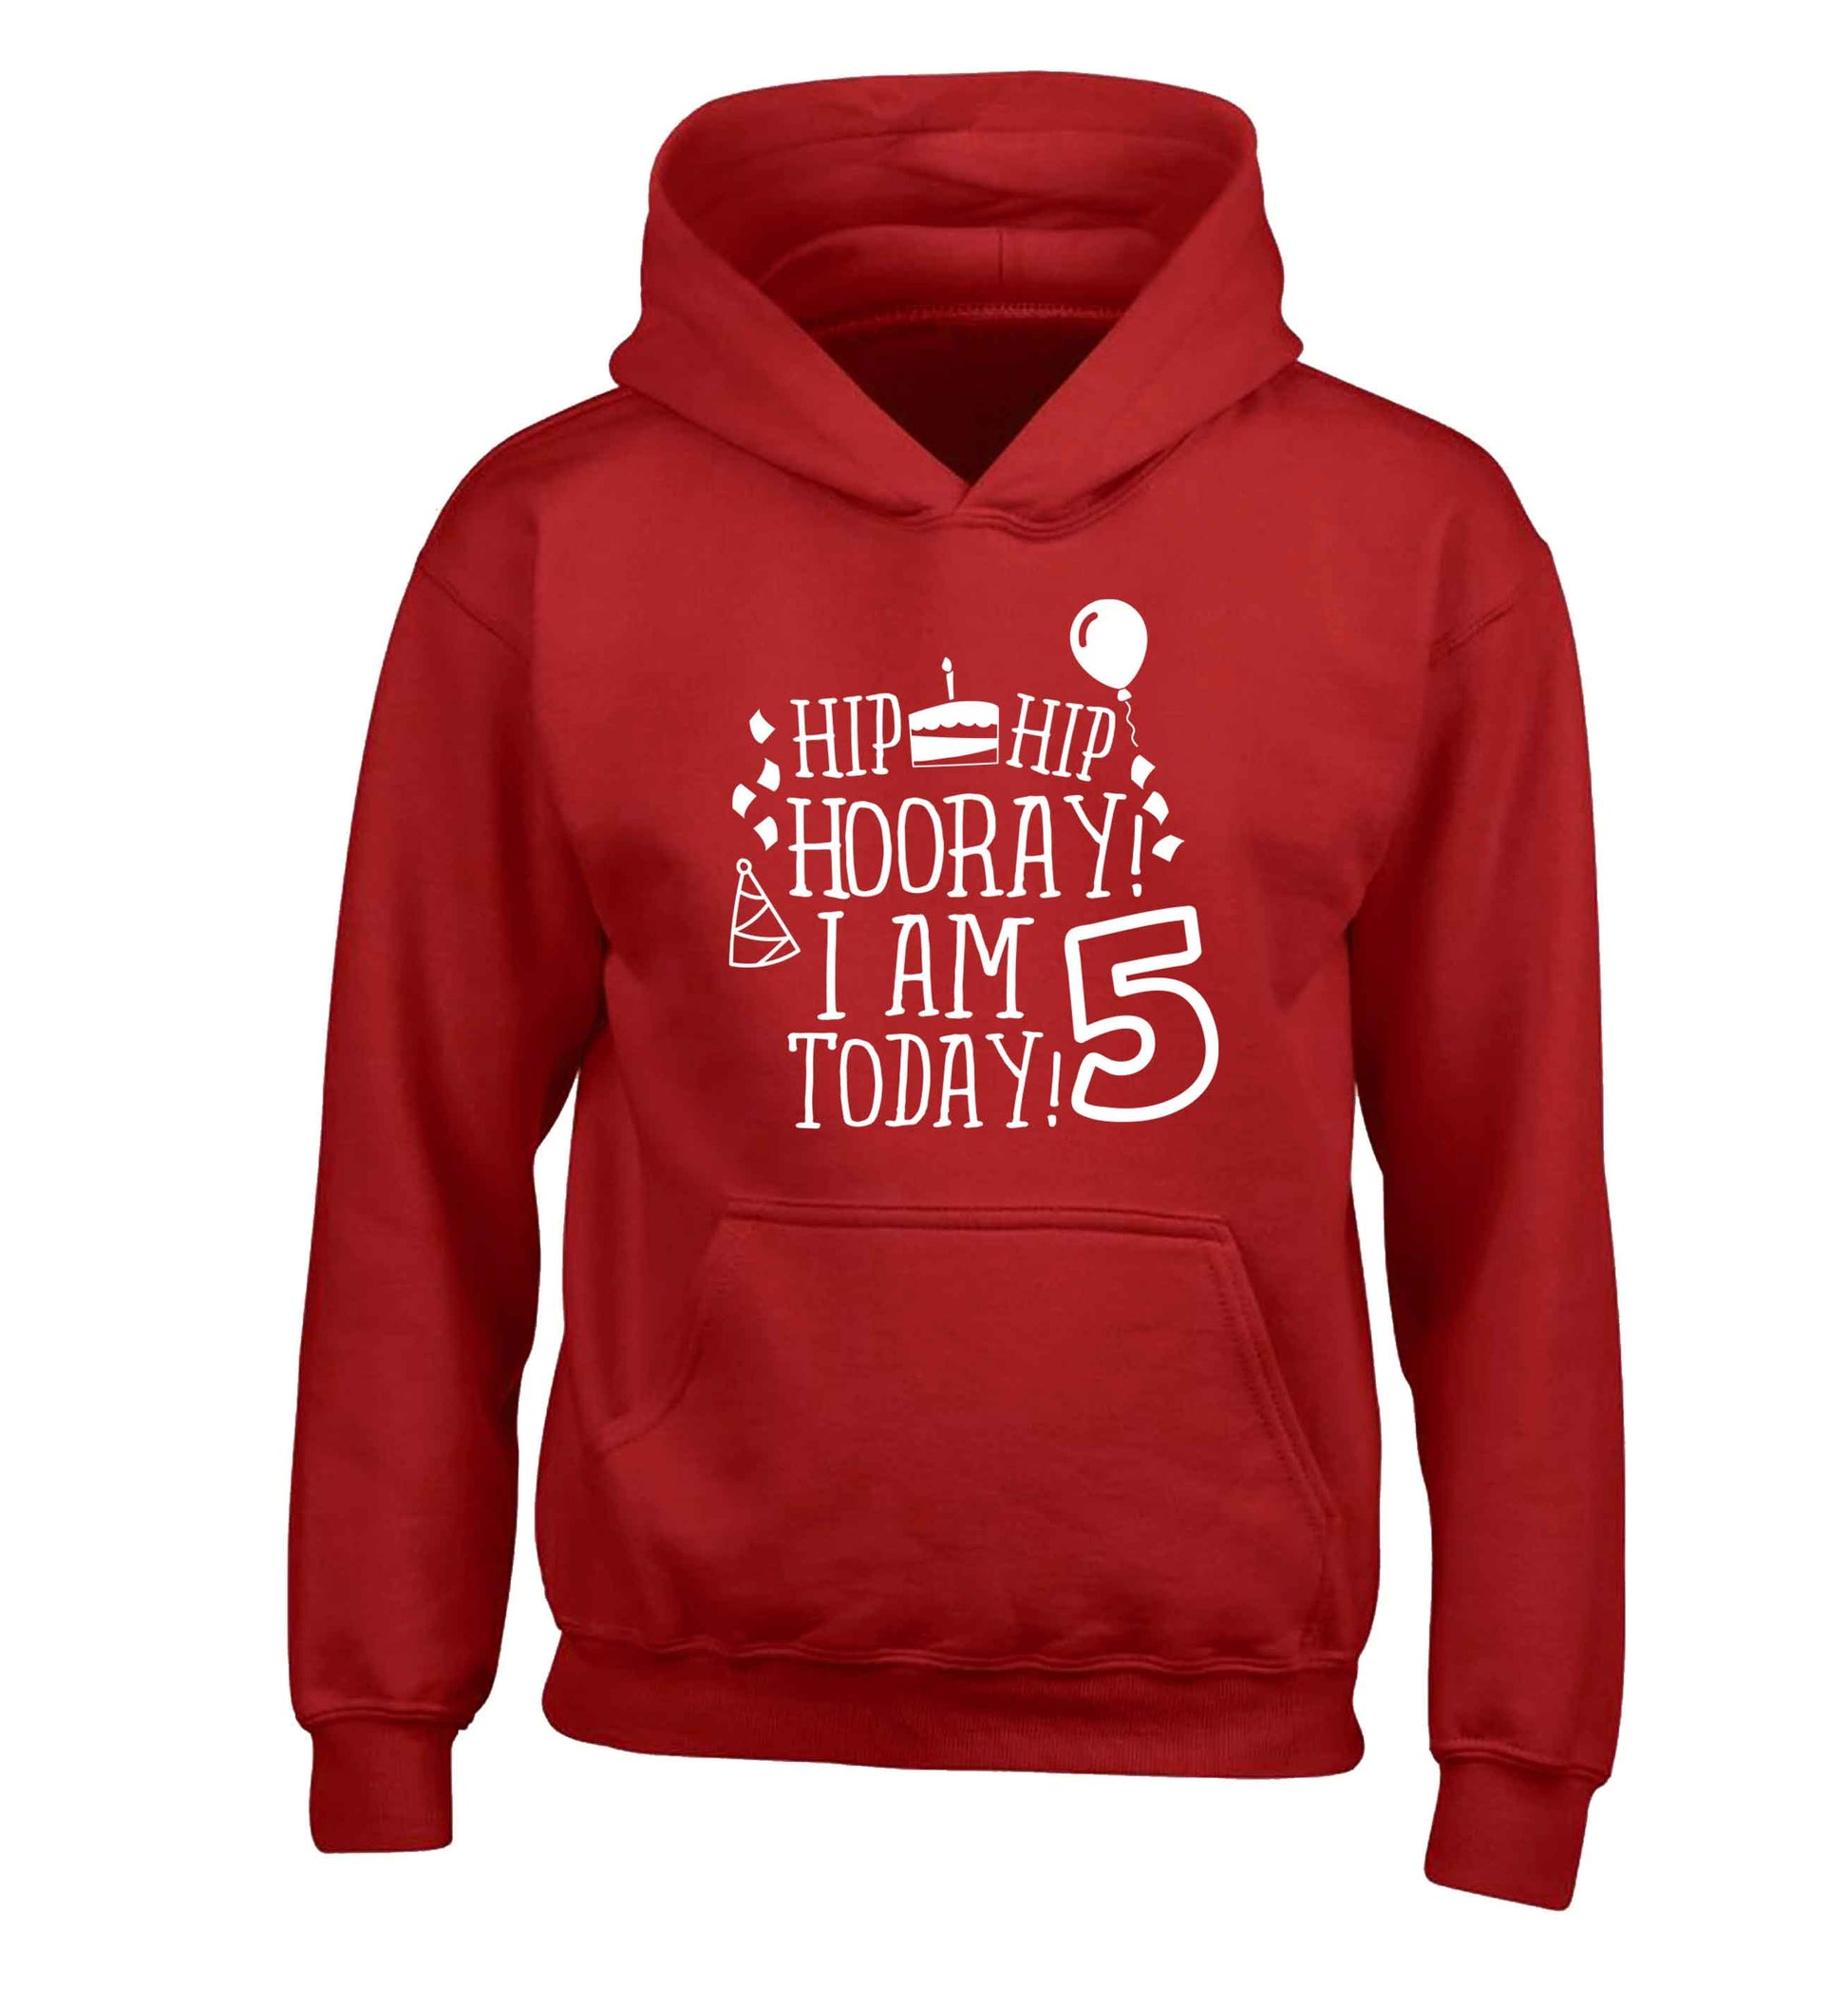 Hip hip hooray I am five today! children's red hoodie 12-13 Years